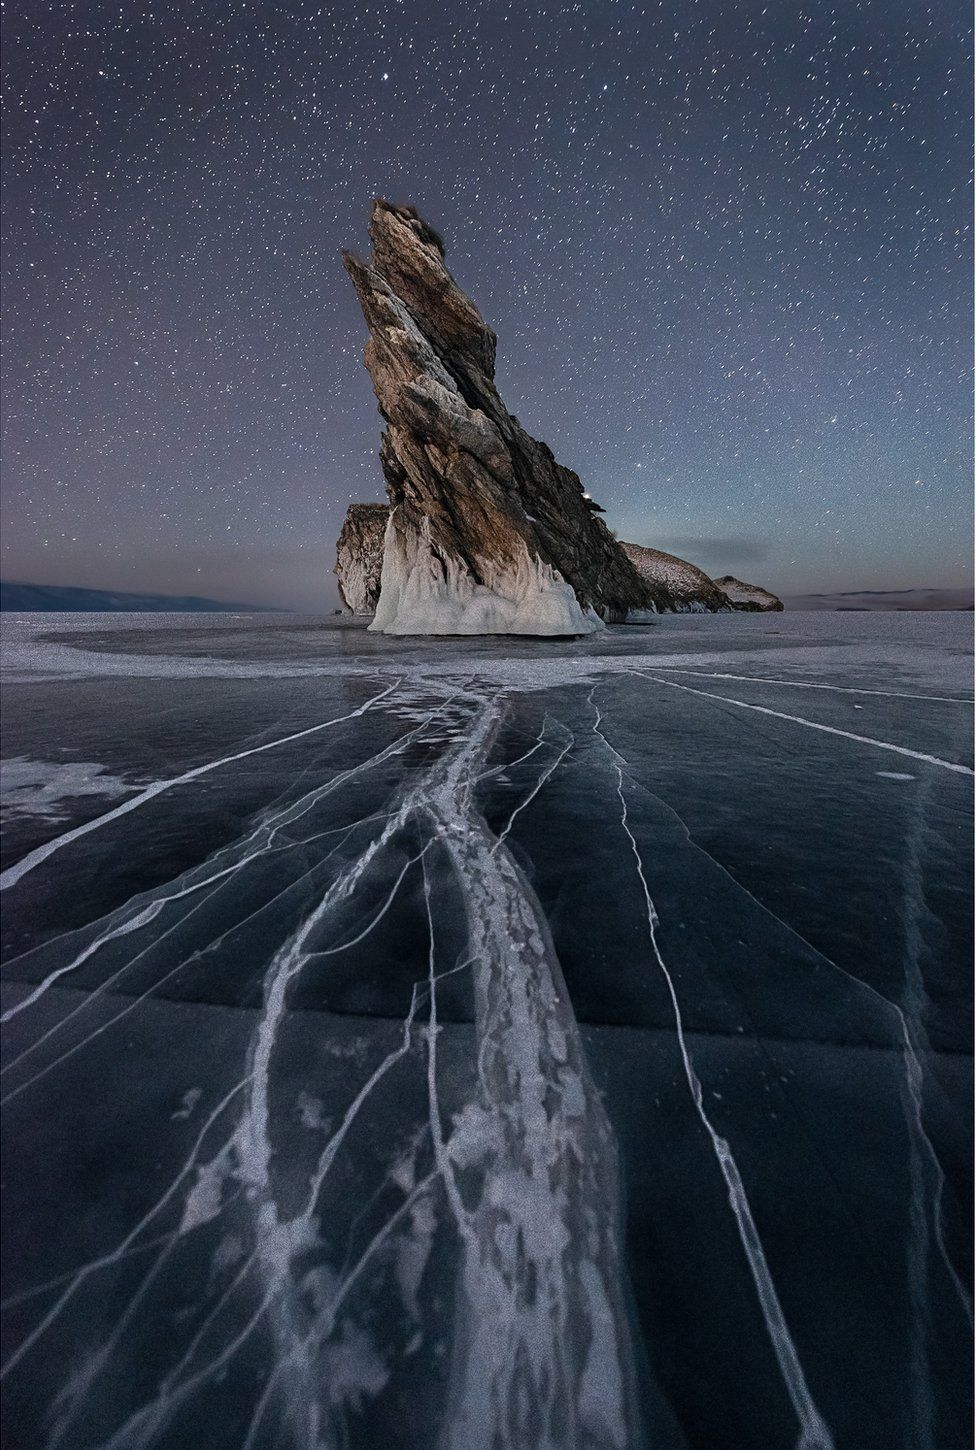 A steep rocky island protrudes out of a frozen lake